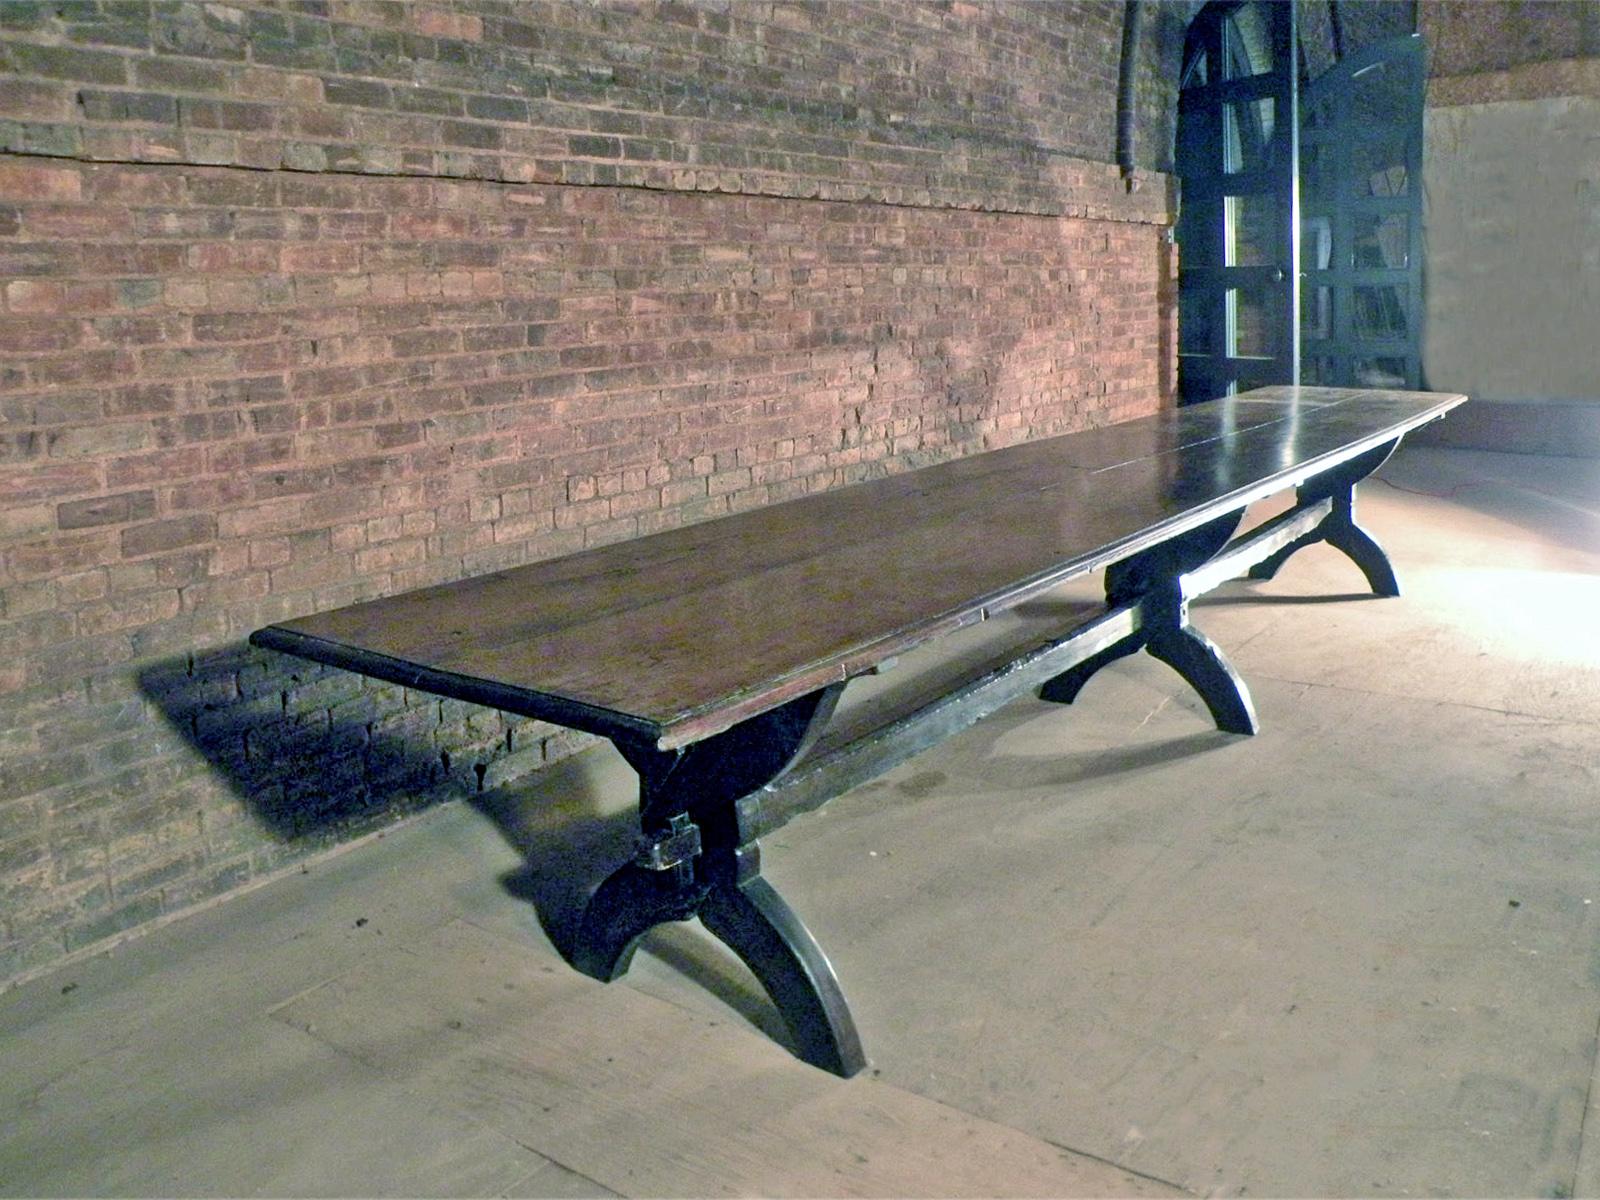 16 foot table